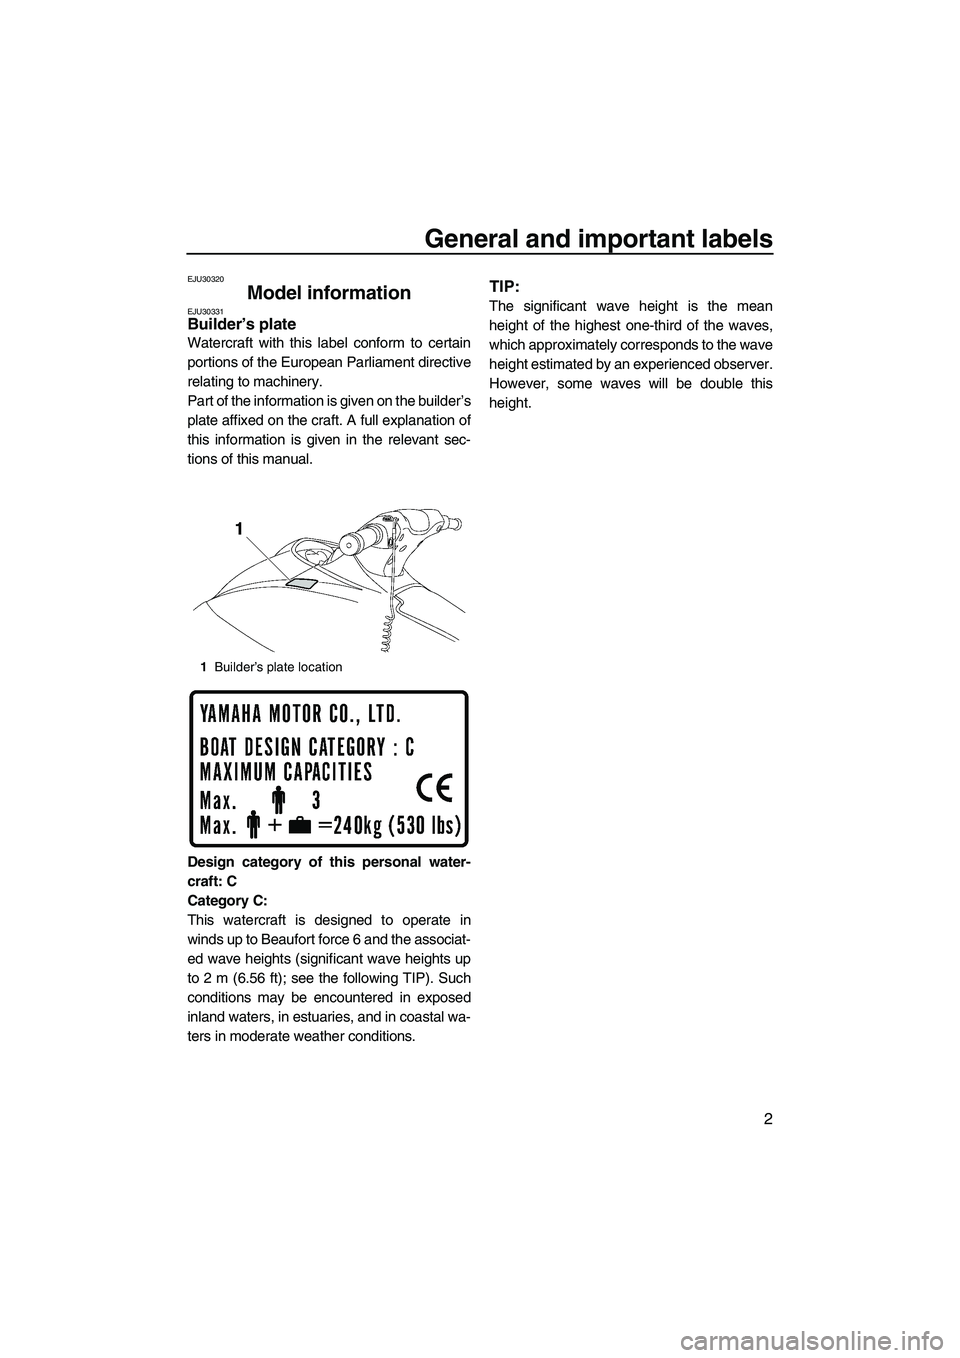 YAMAHA VX SPORT 2009  Owners Manual General and important labels
2
EJU30320
Model information EJU30331Builder’s plate 
Watercraft with this label conform to certain
portions of the European Parliament directive
relating to machinery.
